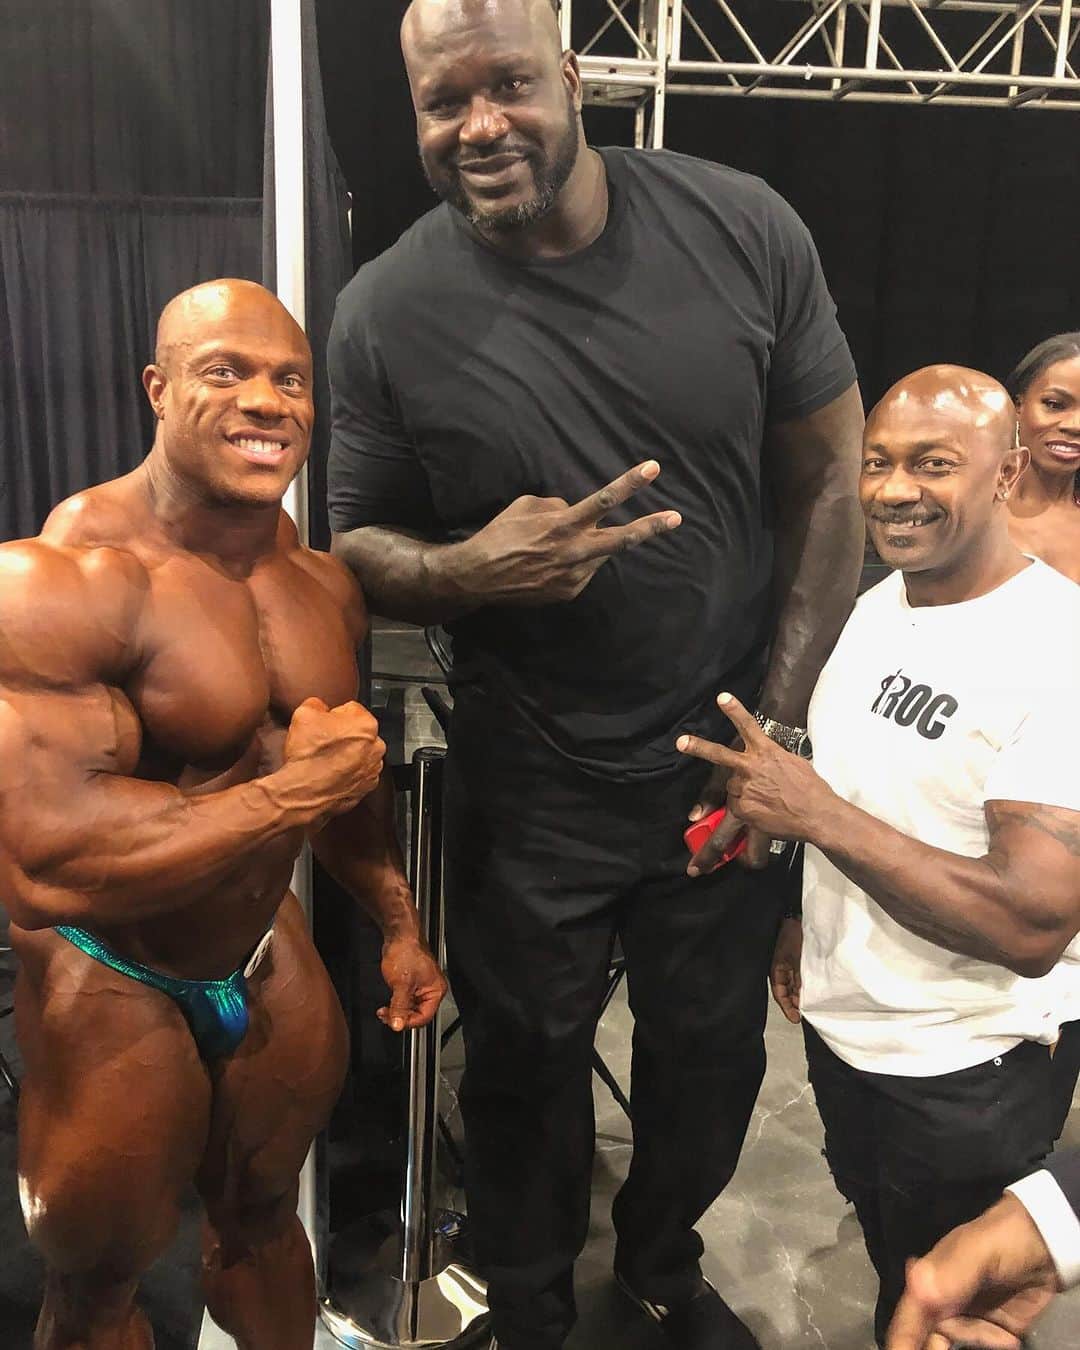 Phil Heathのインスタグラム：「Throwing it back to the 2018 Mr. Olympia with @philheath, @rocshabazz and @shaq 💪🏾👊🏾 #throwbackthursday #mrolympia」